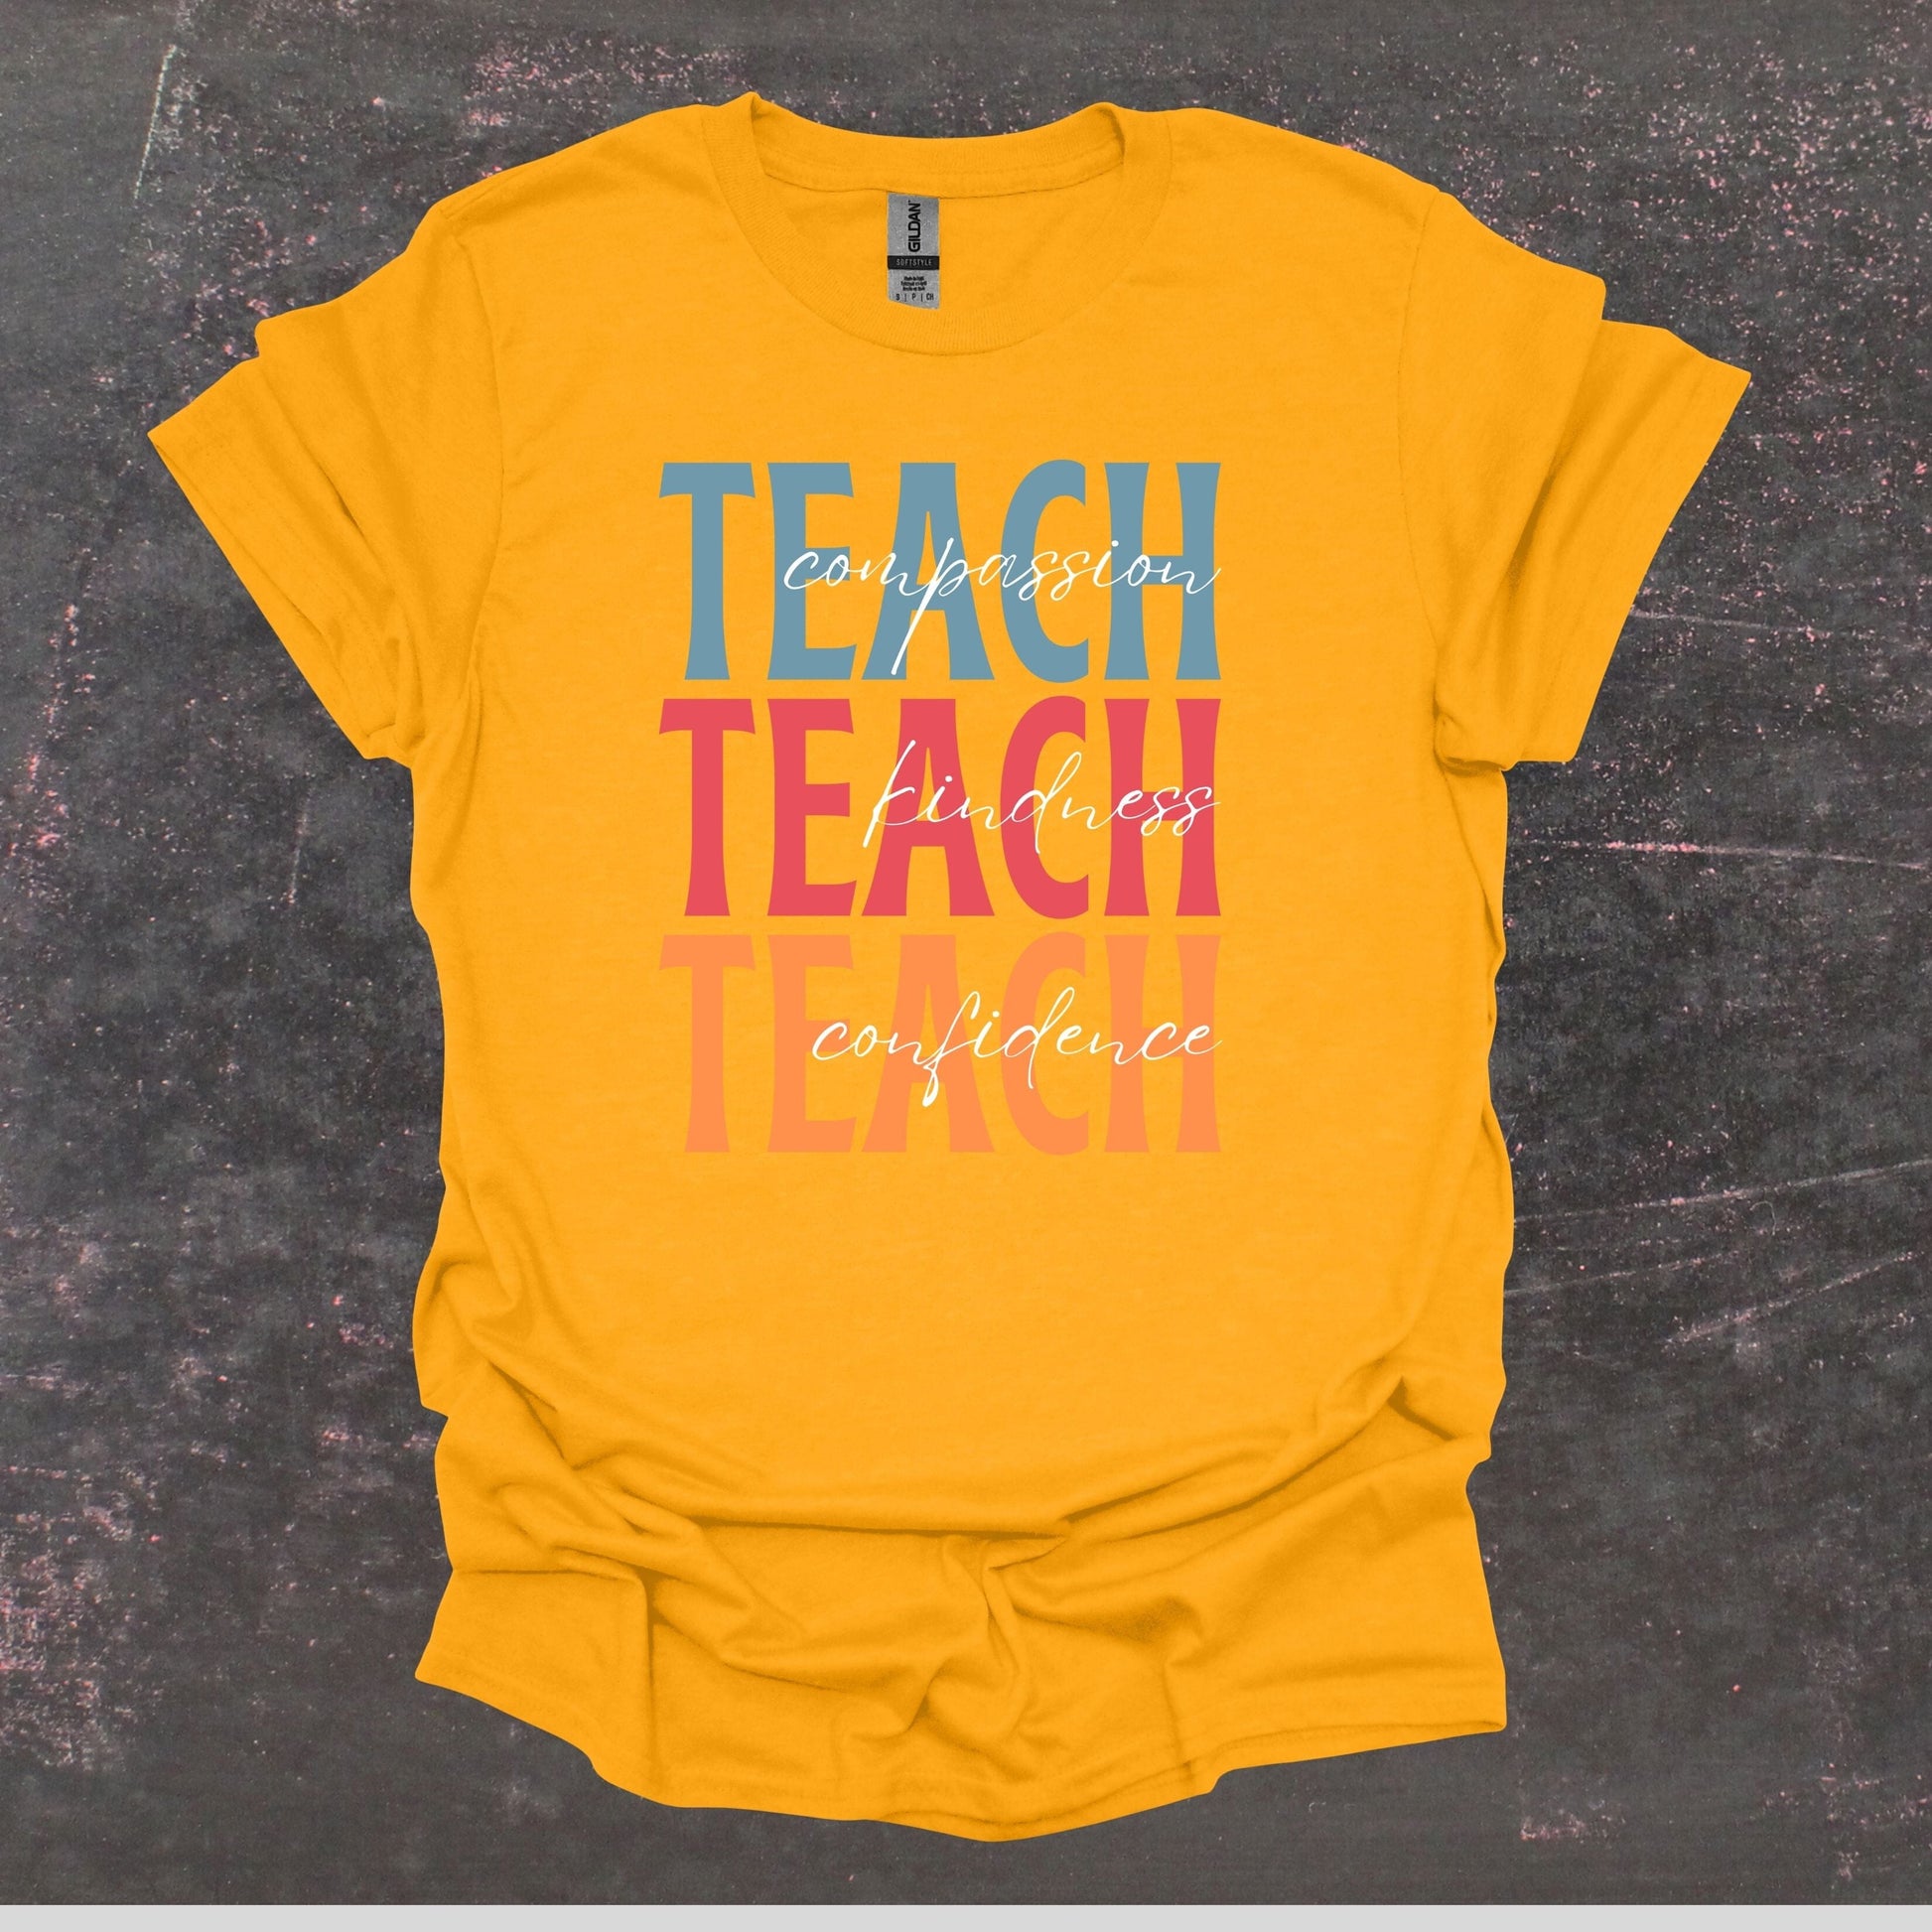 Teach Compassion Kindness Confidence - Teacher T Shirt - Adult Tee Shirts T-Shirts Graphic Avenue Gold Adult Small 